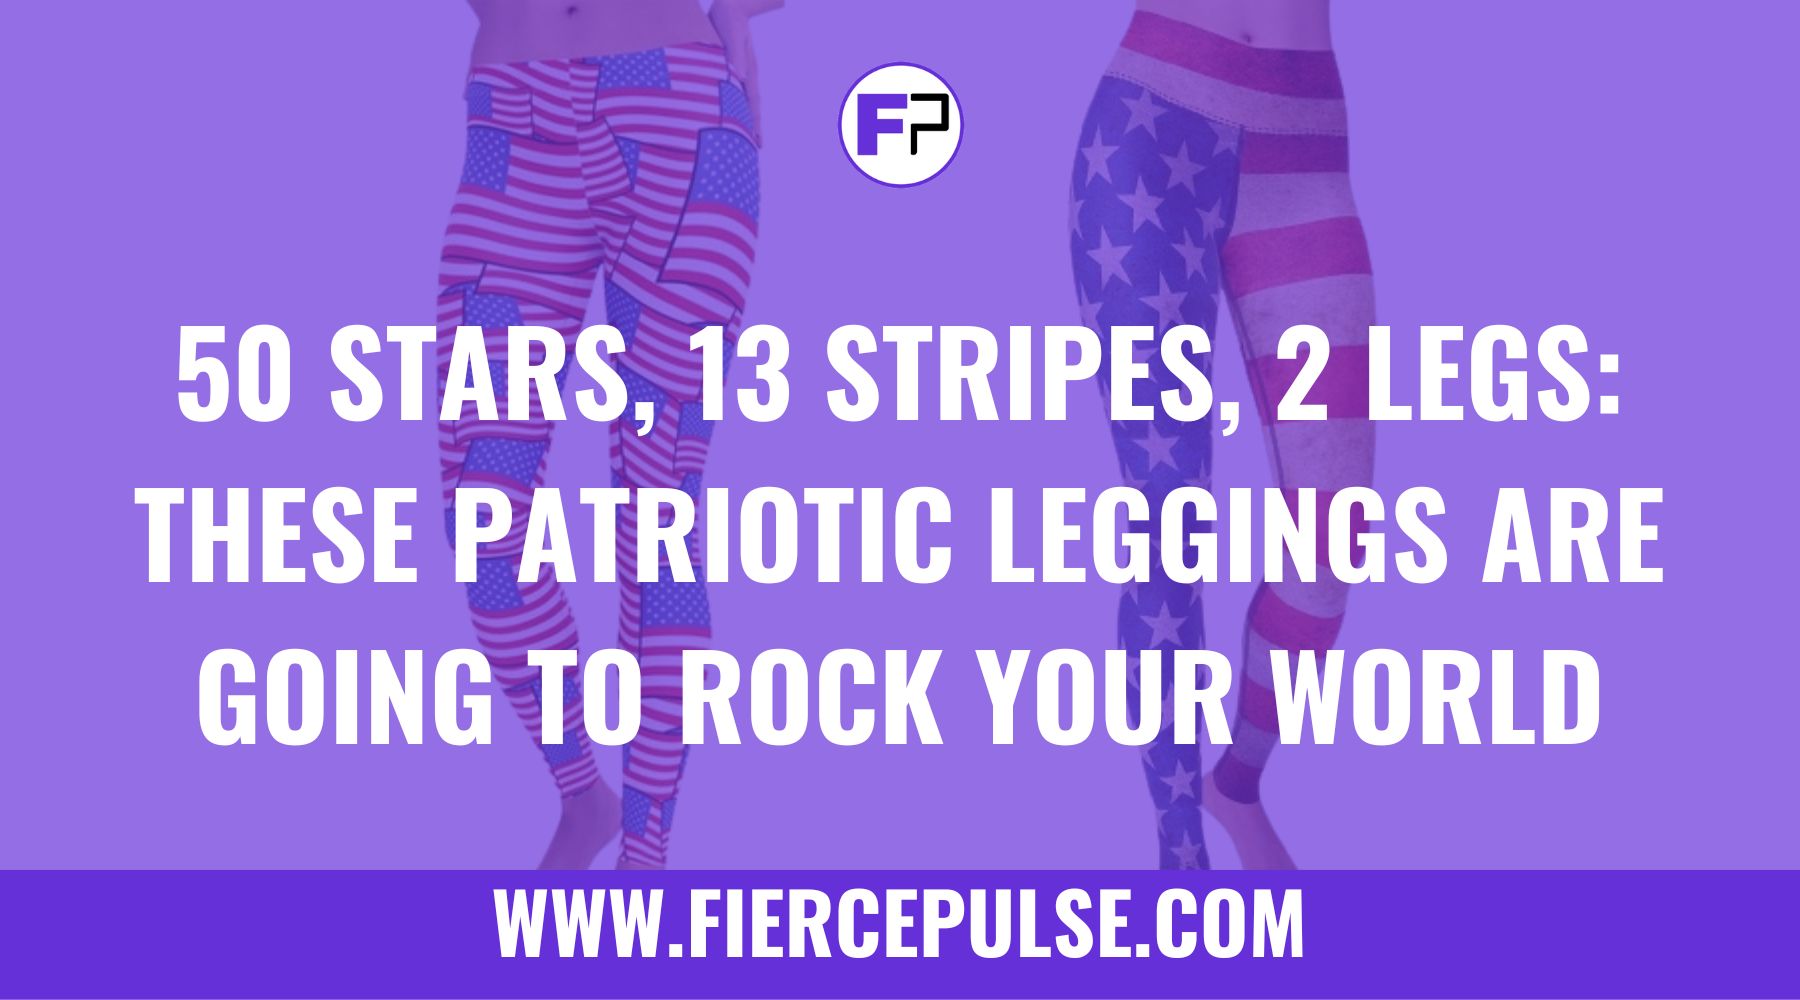 50 Stars, 13 Stripes, 2 Legs: These Patriotic Leggings Are Going to Rock Your World